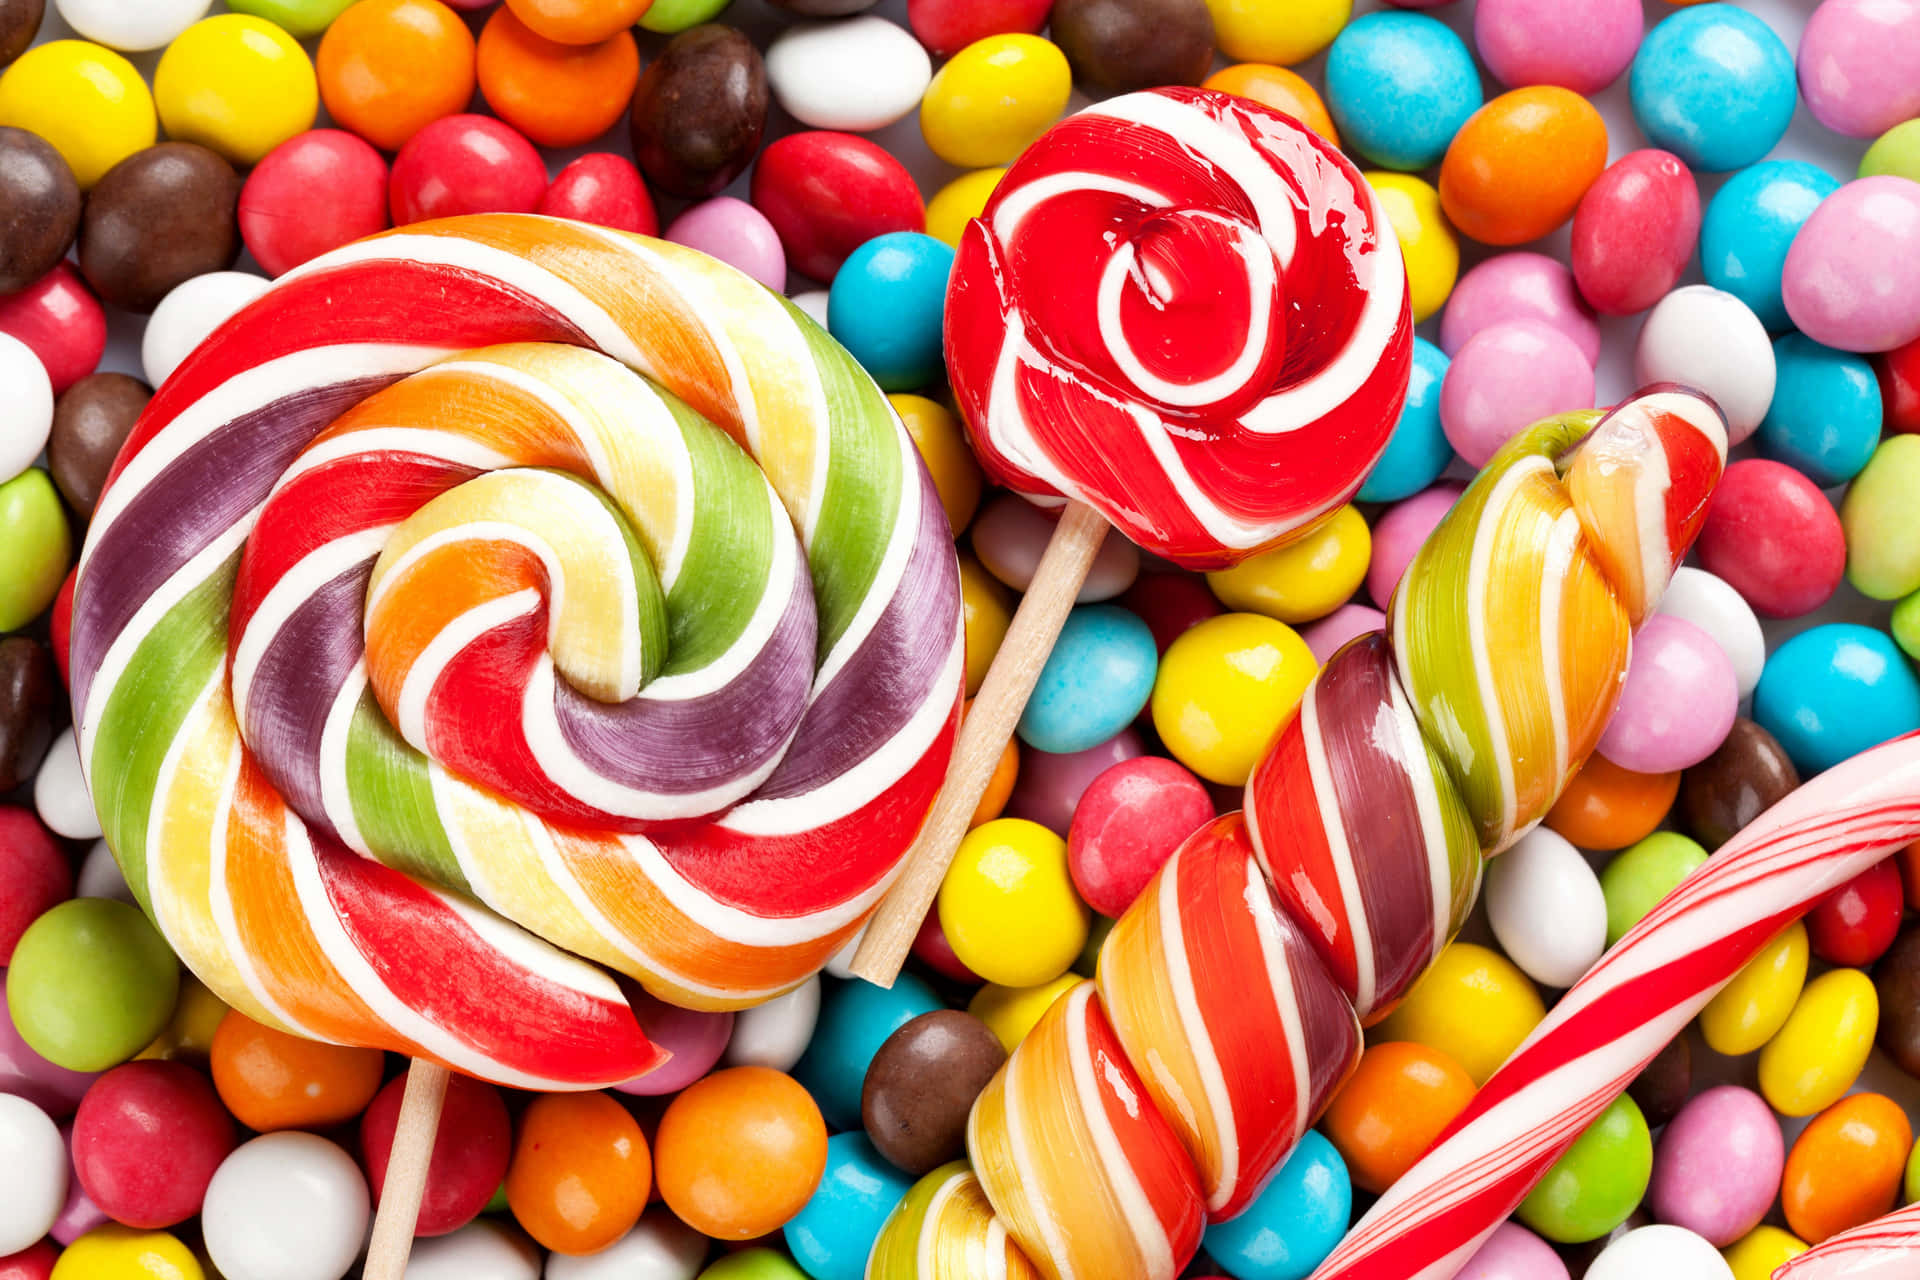 Indulge your sweet tooth with delicious candies and treats!